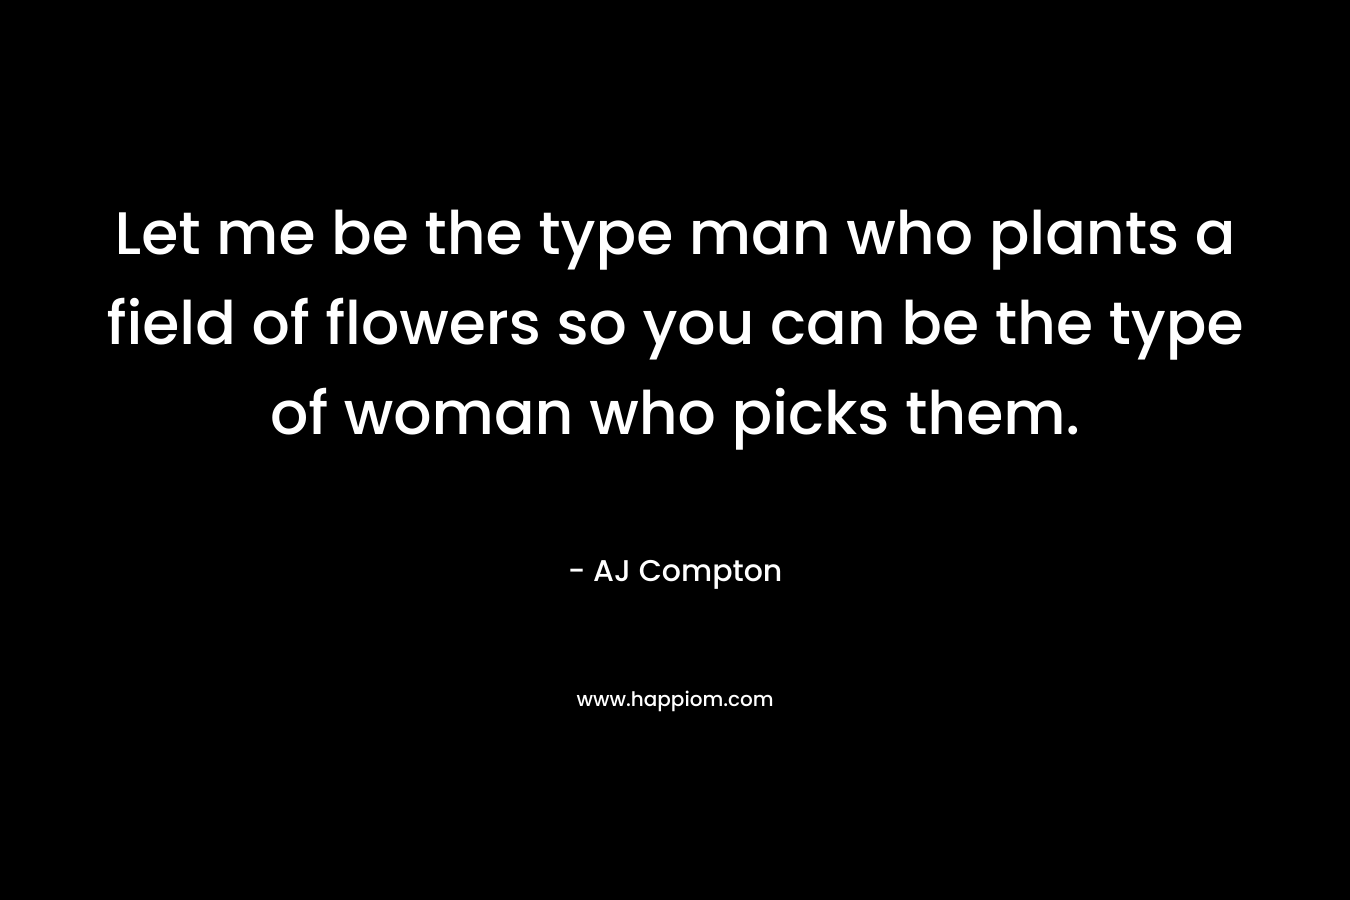 Let me be the type man who plants a field of flowers so you can be the type of woman who picks them. – AJ Compton